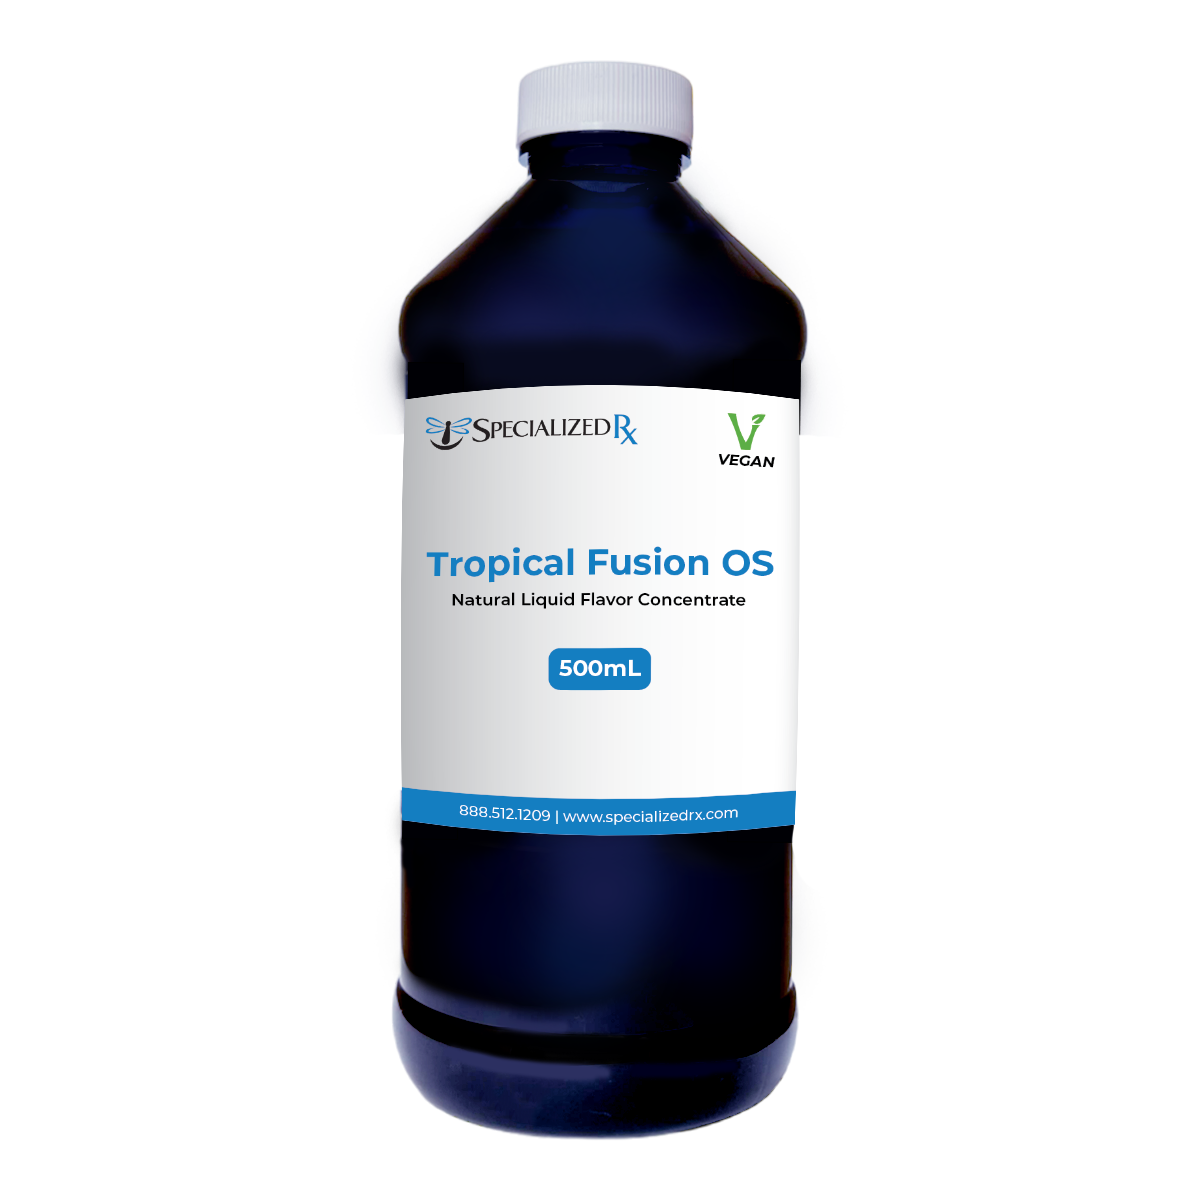 Tropical Fusion OS Natural Liquid Flavor Concentrate